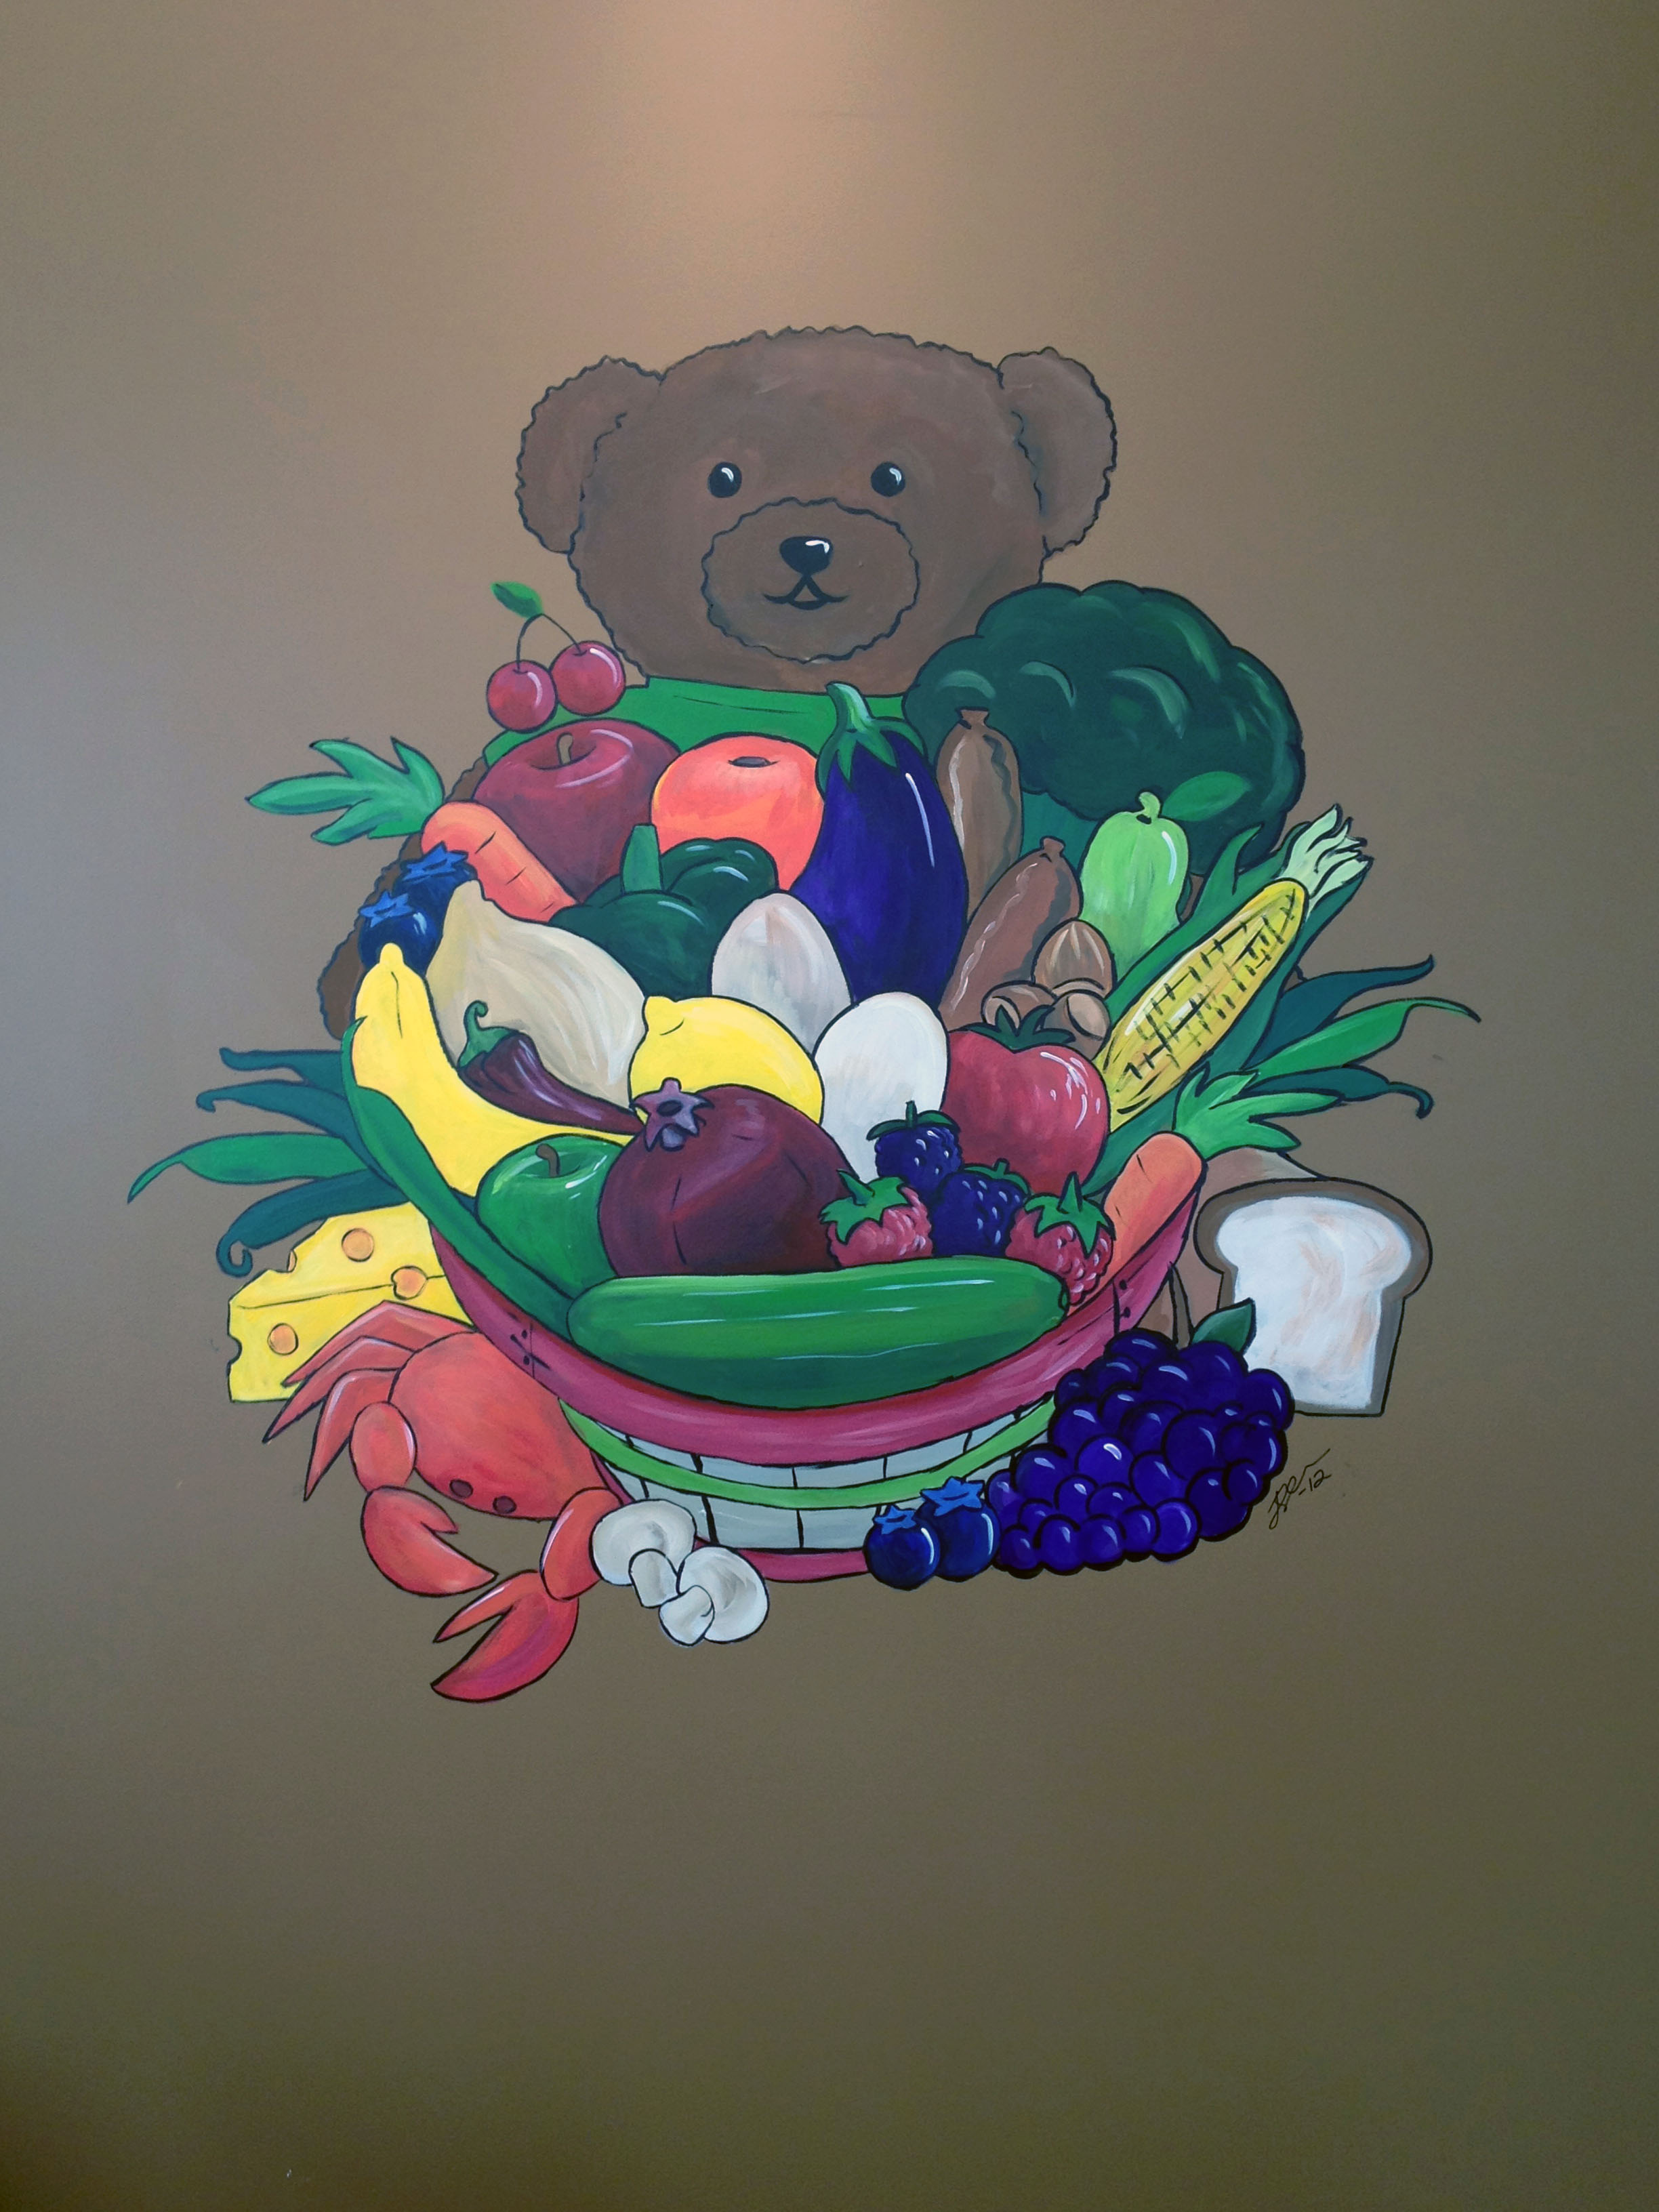 Joshann painting mural of a bear holding a basket of fruits and vegetables 3